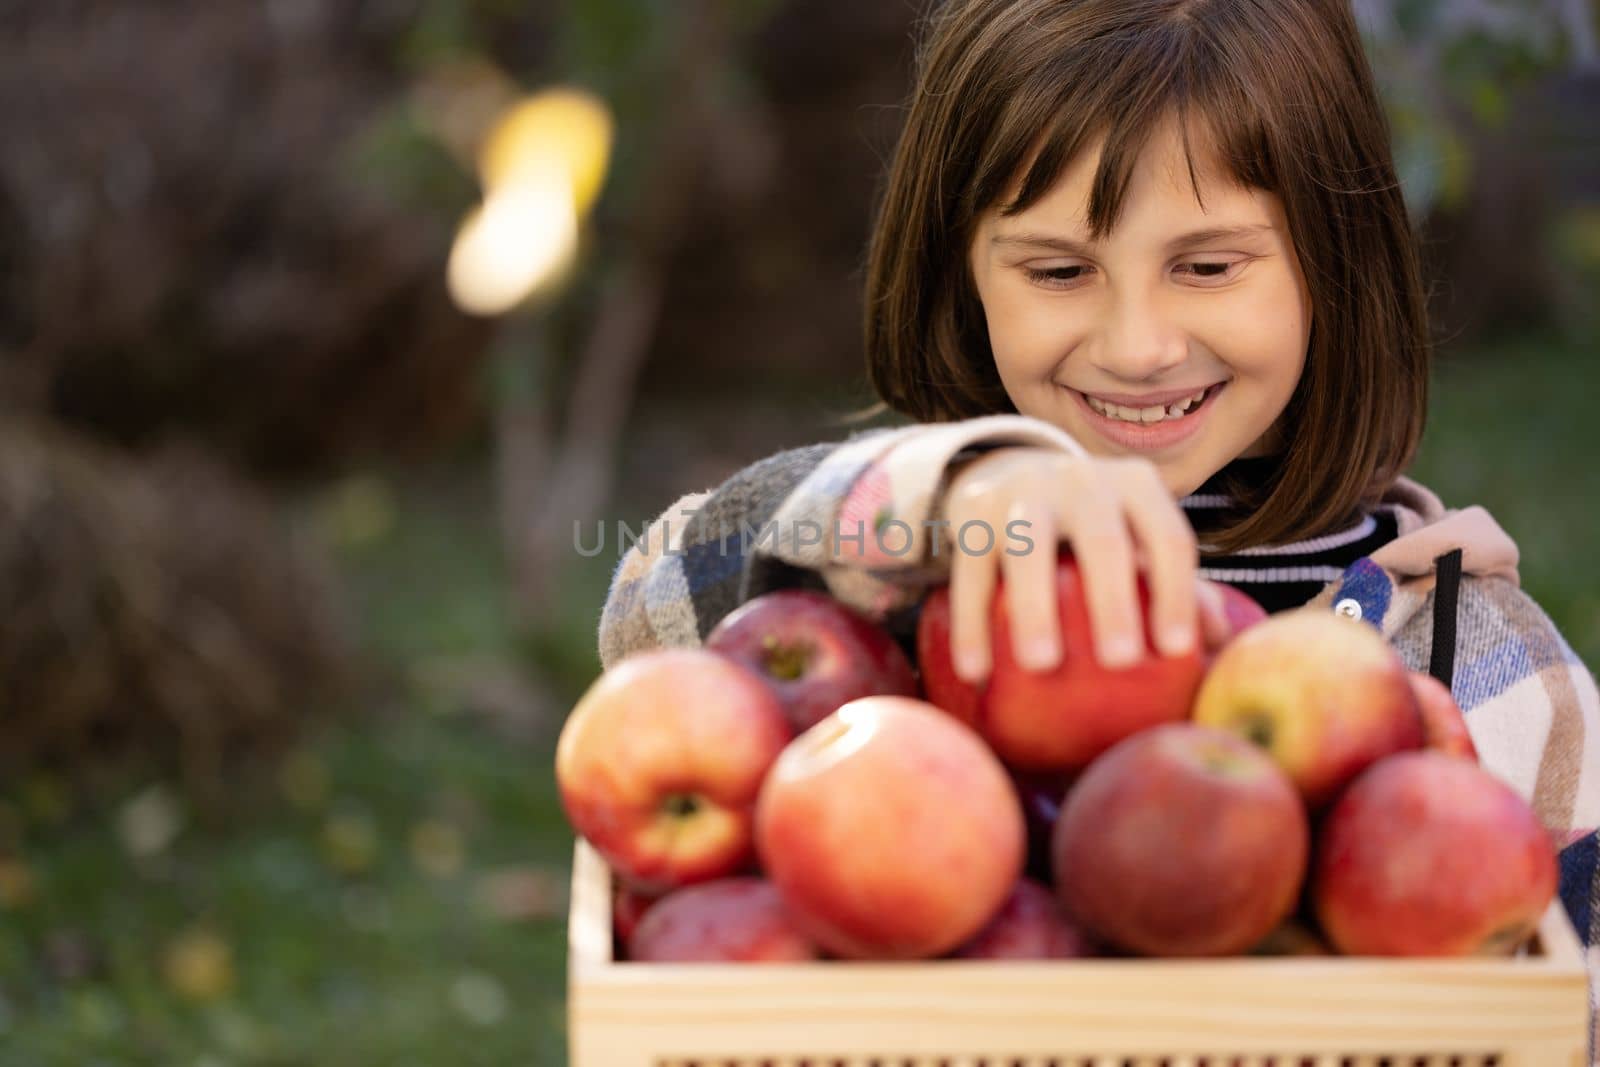 Schoolkid girl's hand take red apple and eats an apple. Female hand choosing organic fruits. Portrait of healthy schoolgirl eating big red apple.